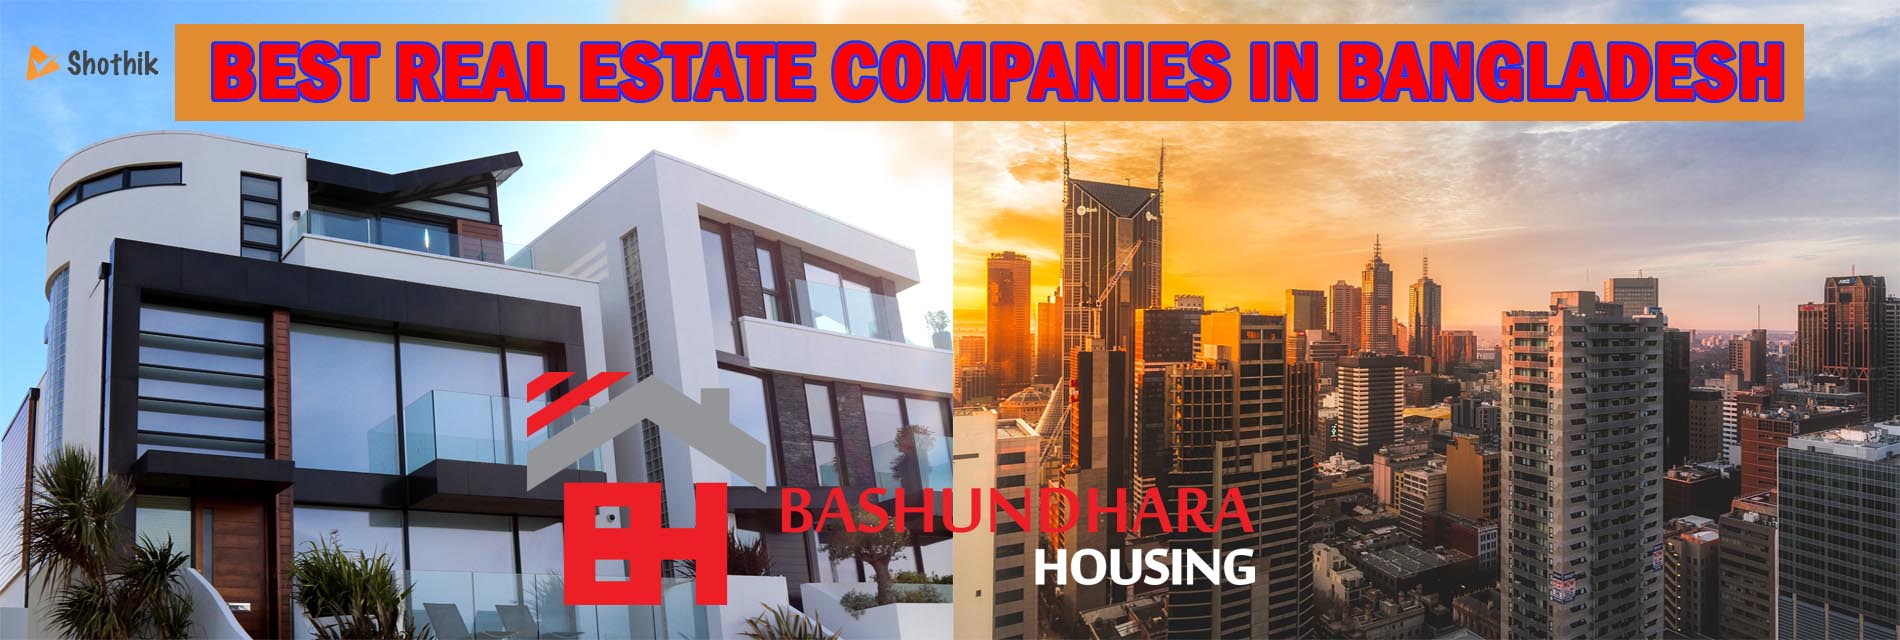 Best real estate companies in Bangladesh F